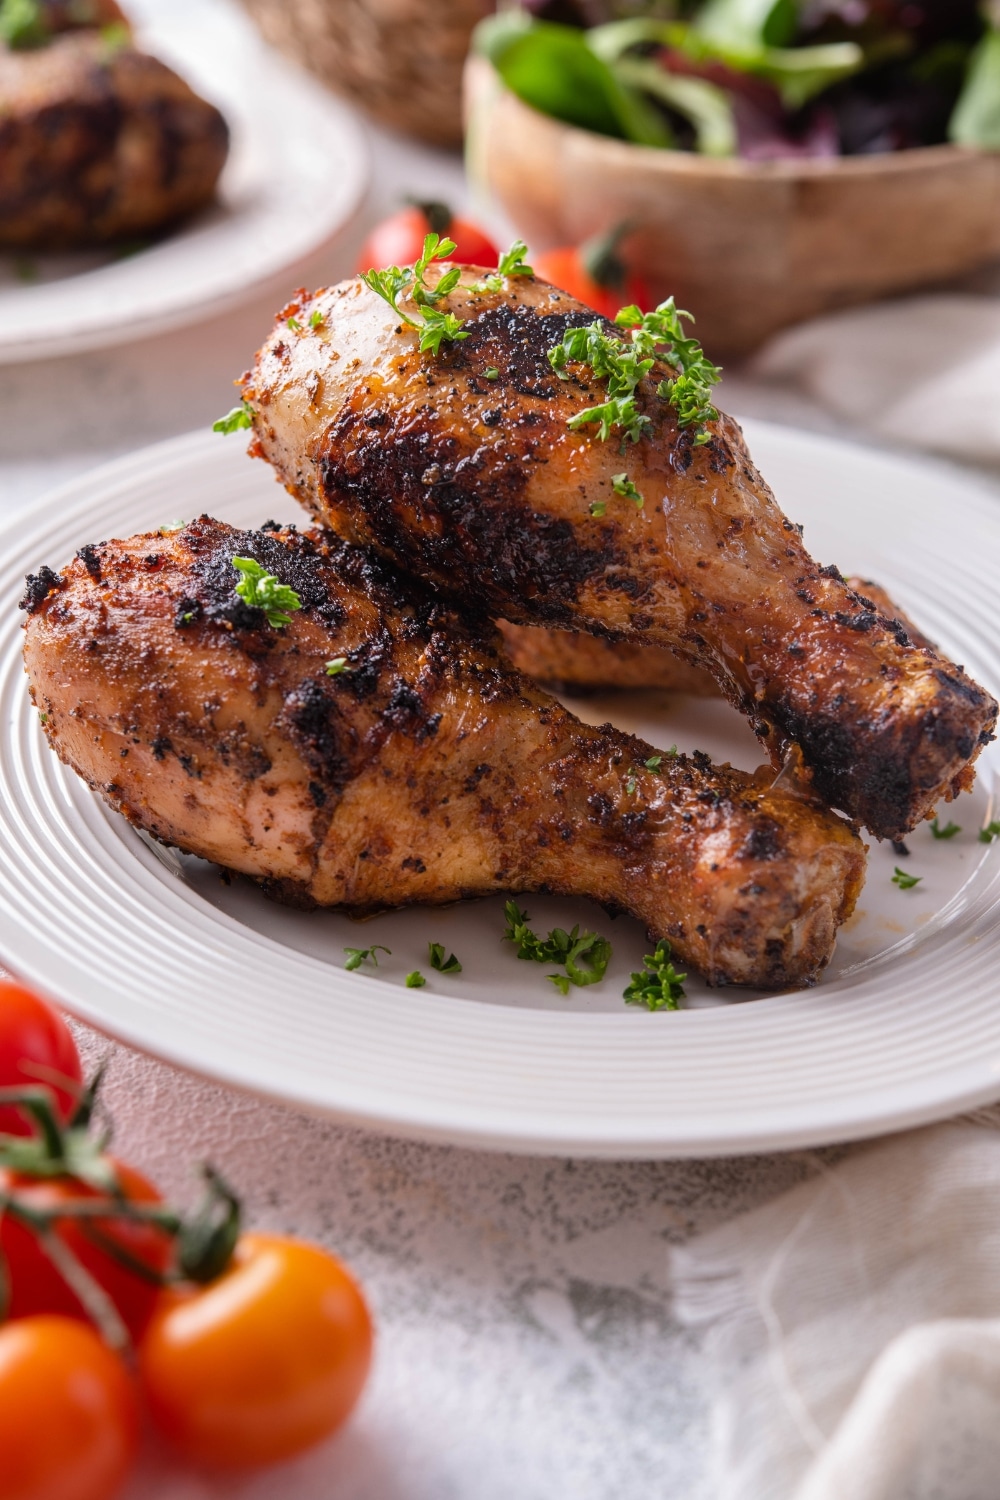 A closer look at grilled chicken drumsticks on a plate with parsley for garnish.